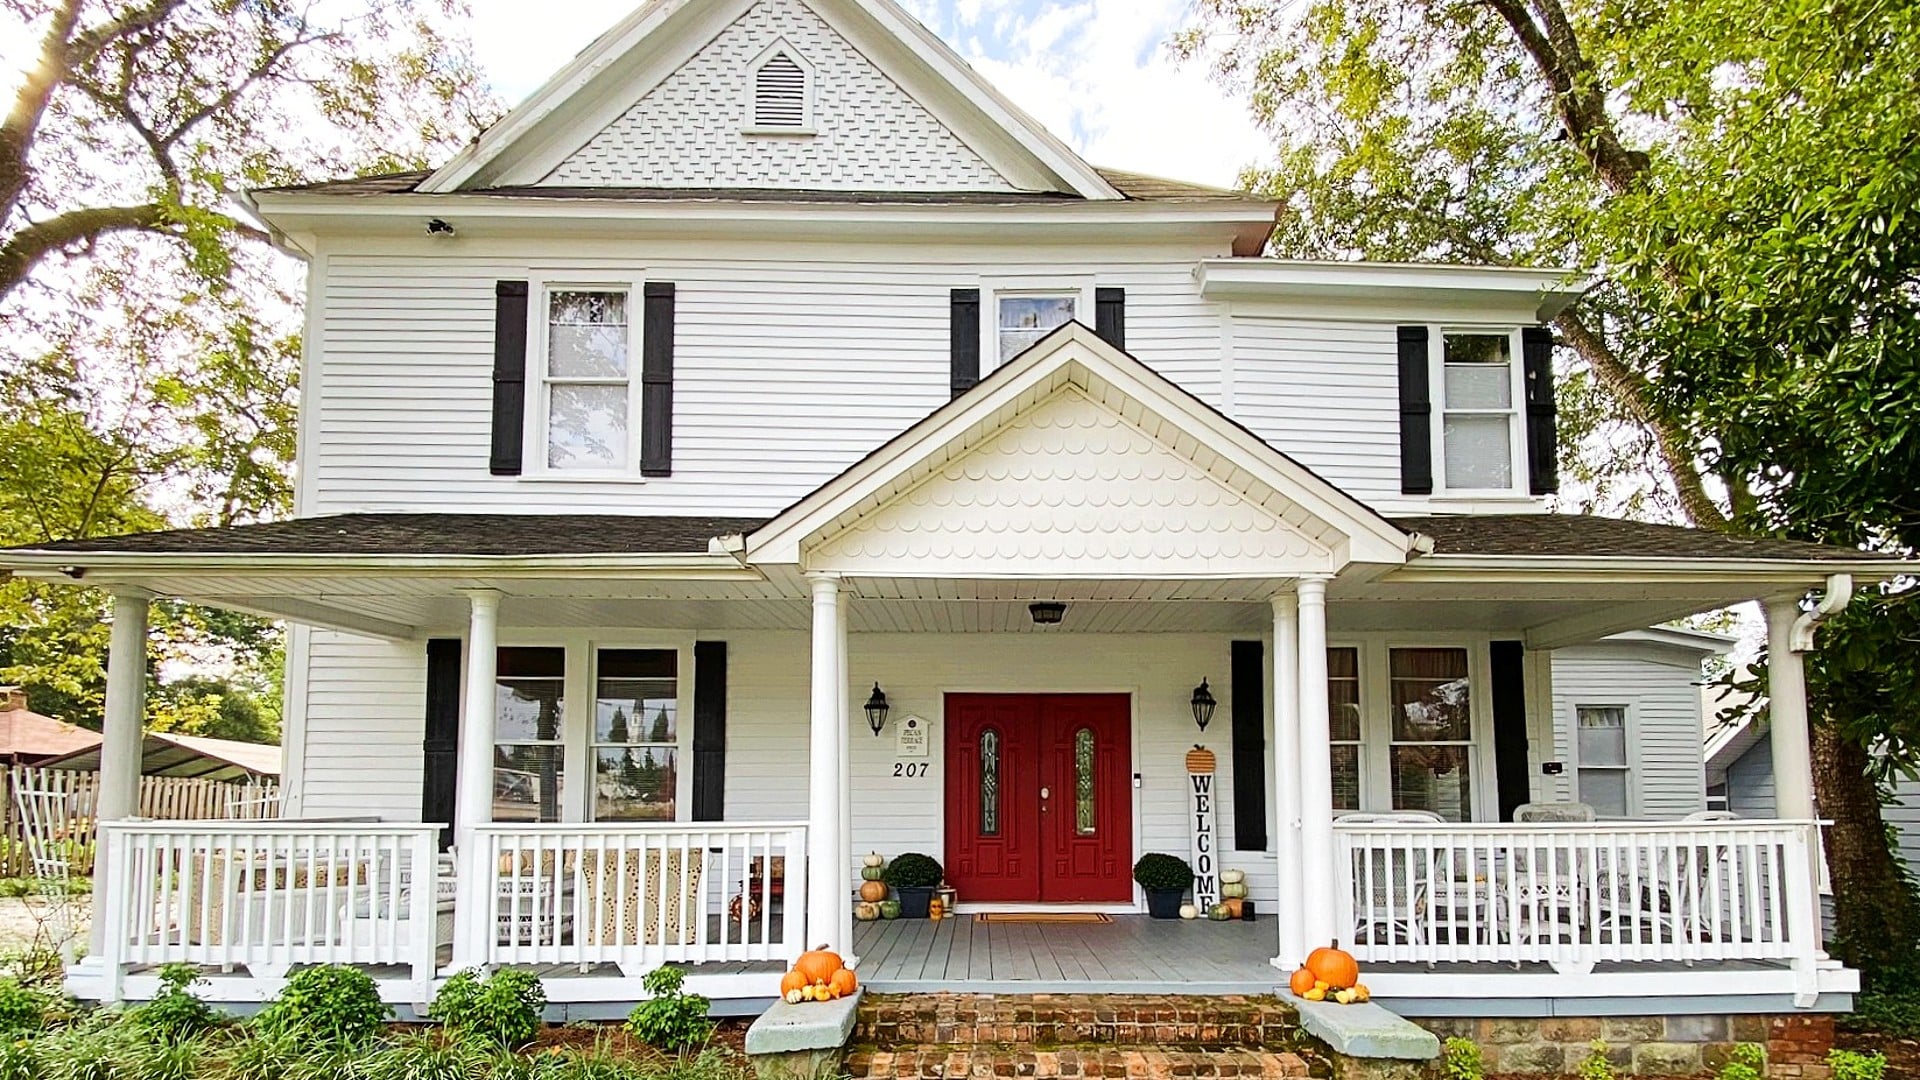 Front facade of a white two-story home with large front porch, black shutters and a red door.